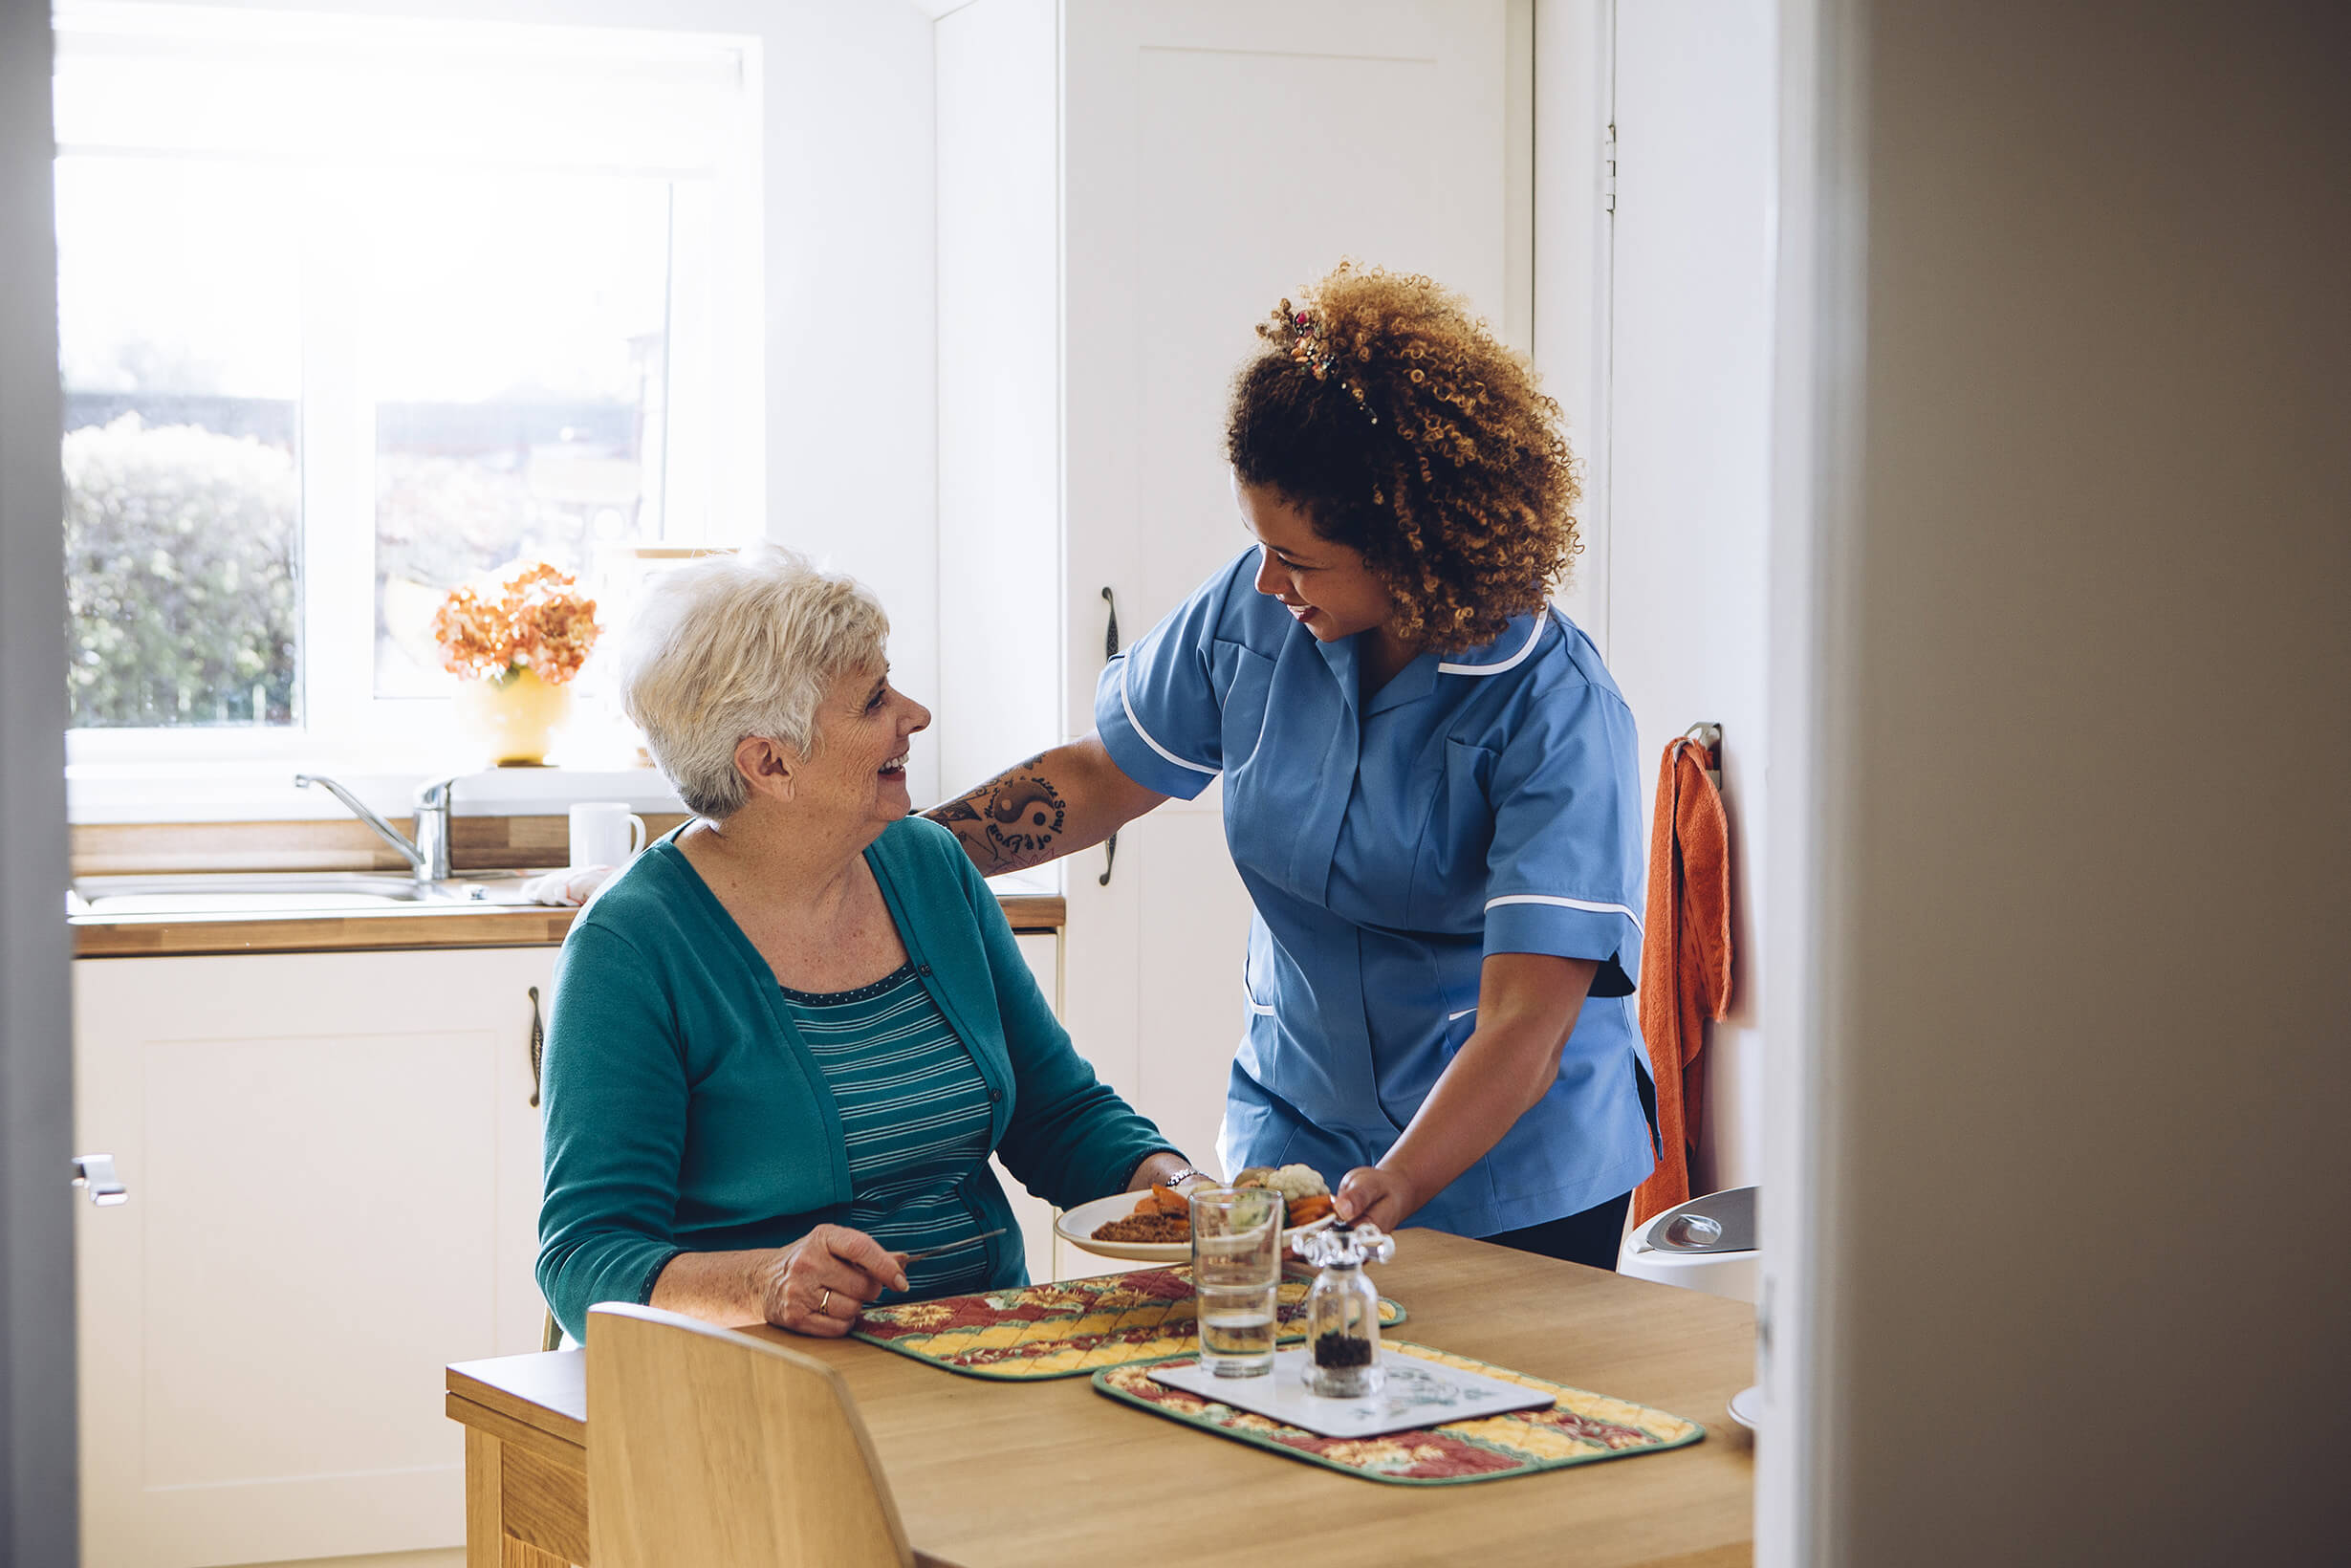 A nurse and an elderly patient at a table. The nurse is giving the lady her dinner.